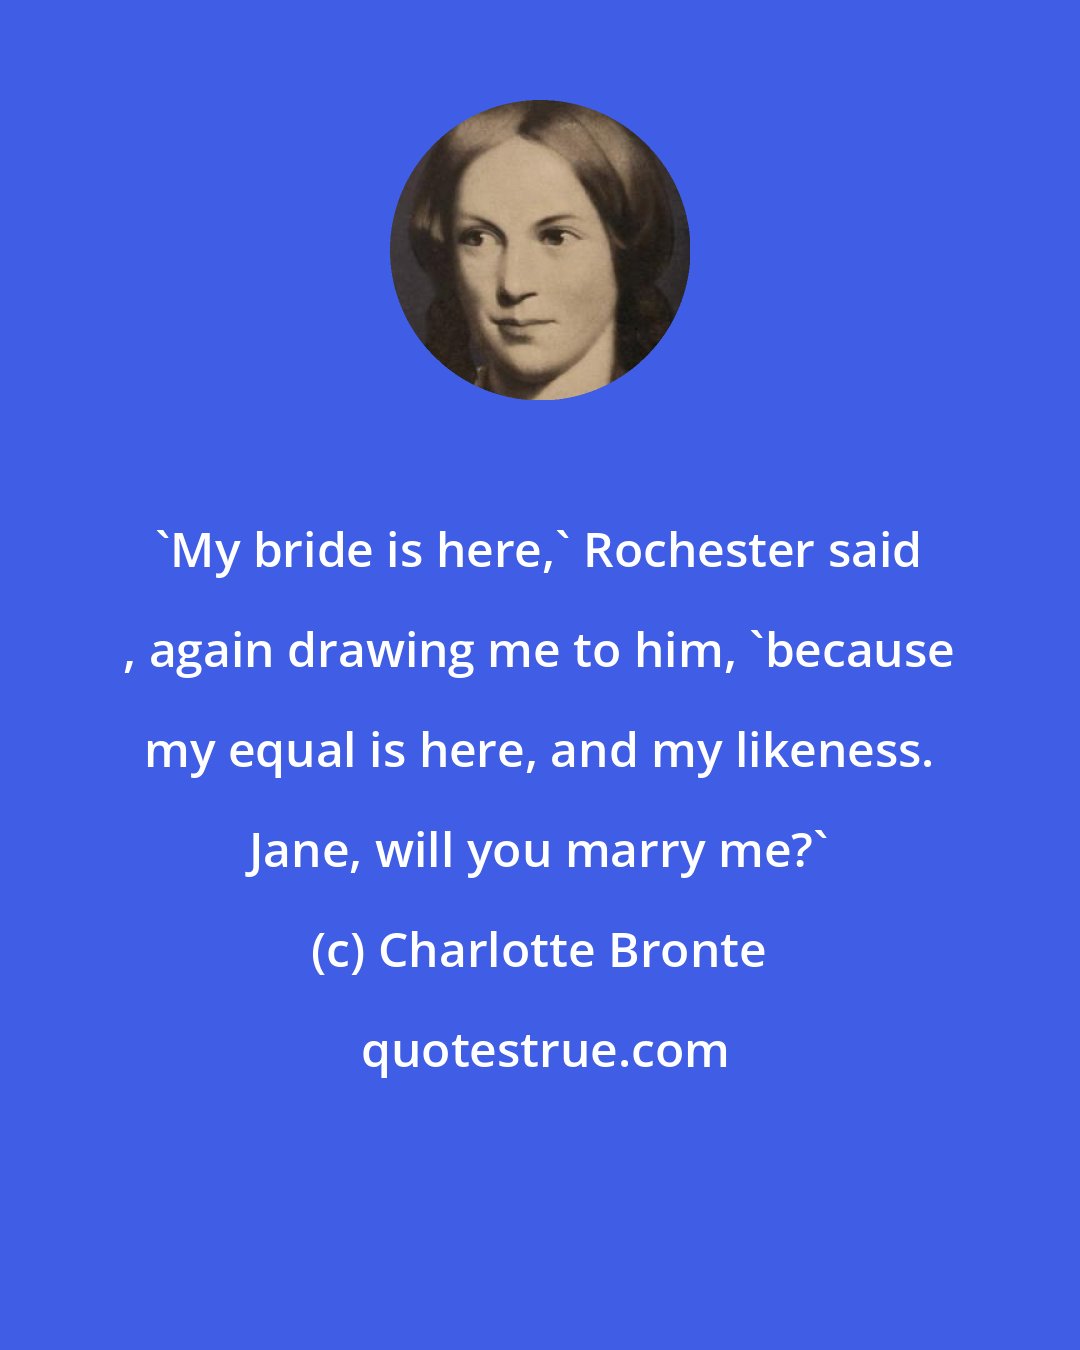 Charlotte Bronte: 'My bride is here,' Rochester said , again drawing me to him, 'because my equal is here, and my likeness. Jane, will you marry me?'